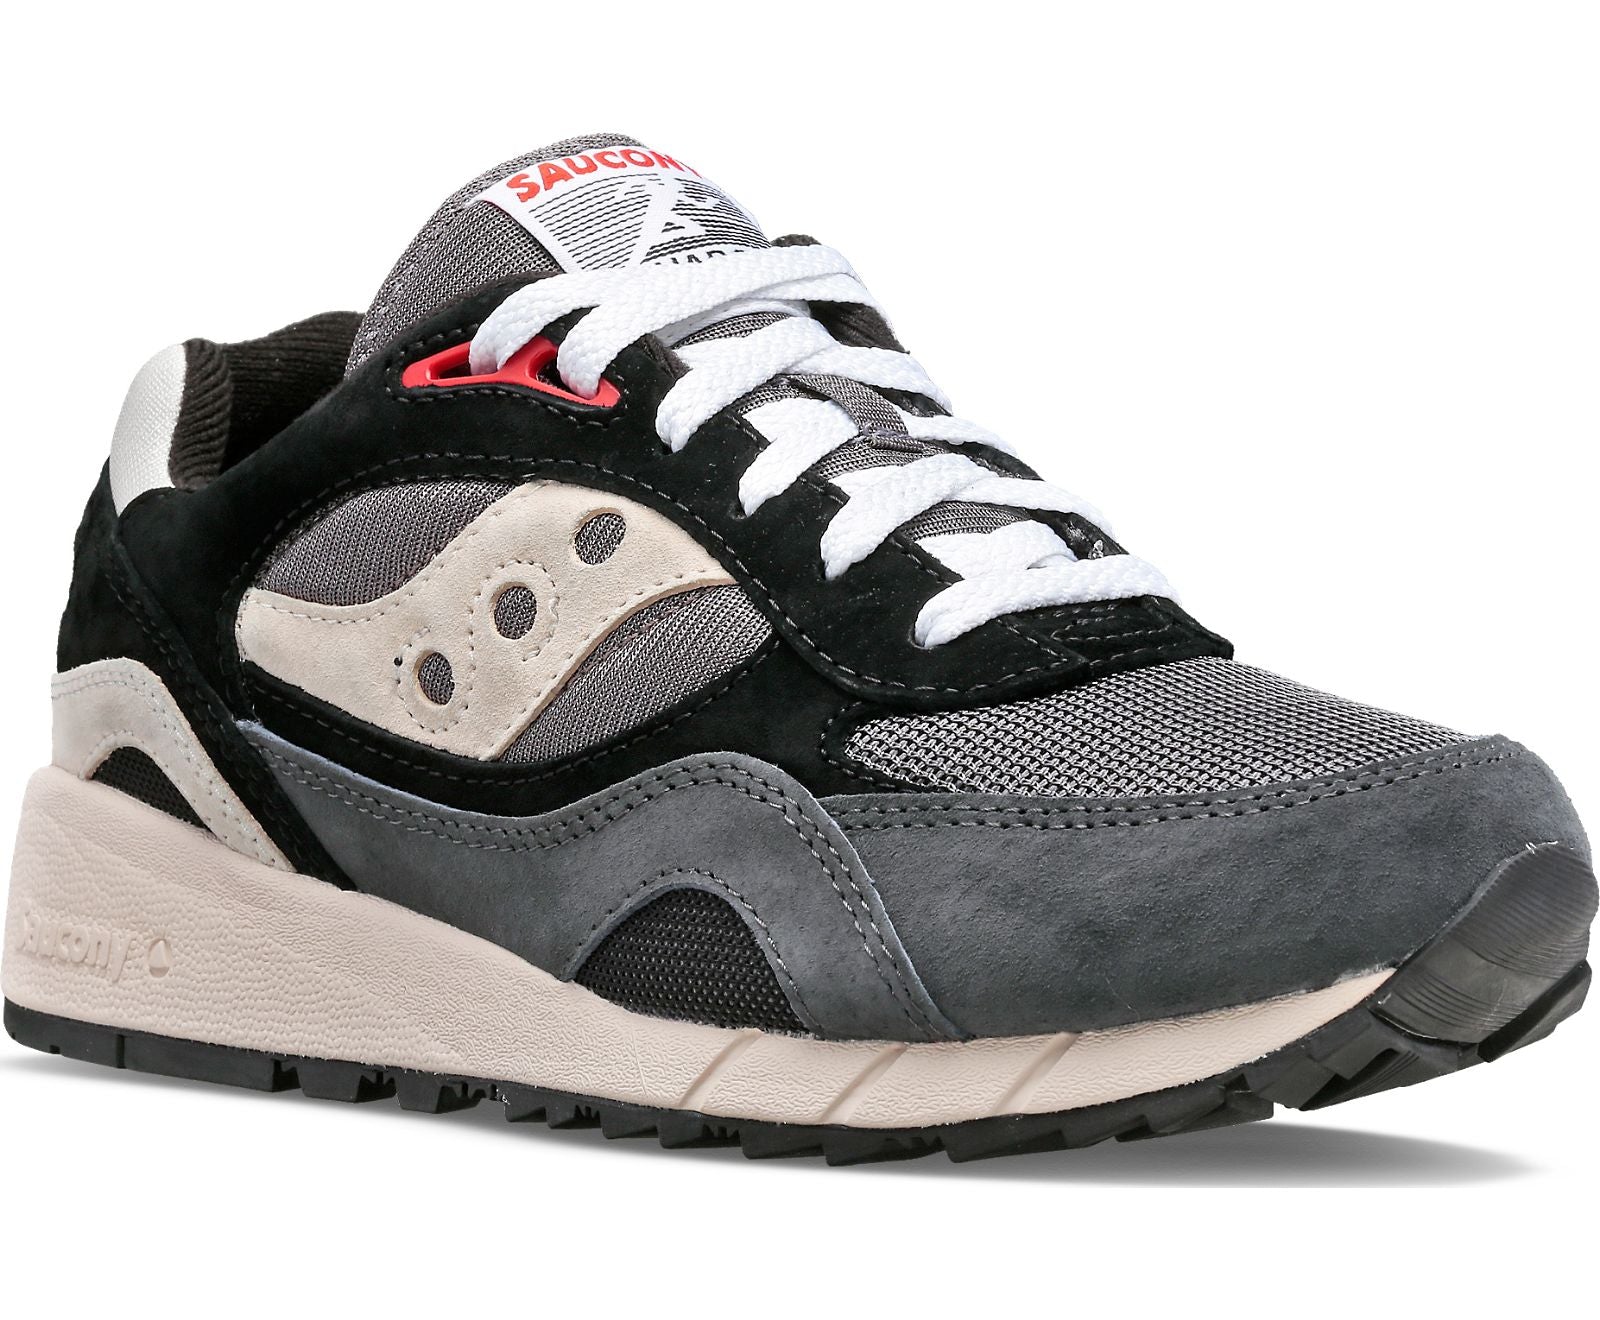 Front angle view of the Men's Saucony Shadow 5000 lifestyle shoe in Grey/Black